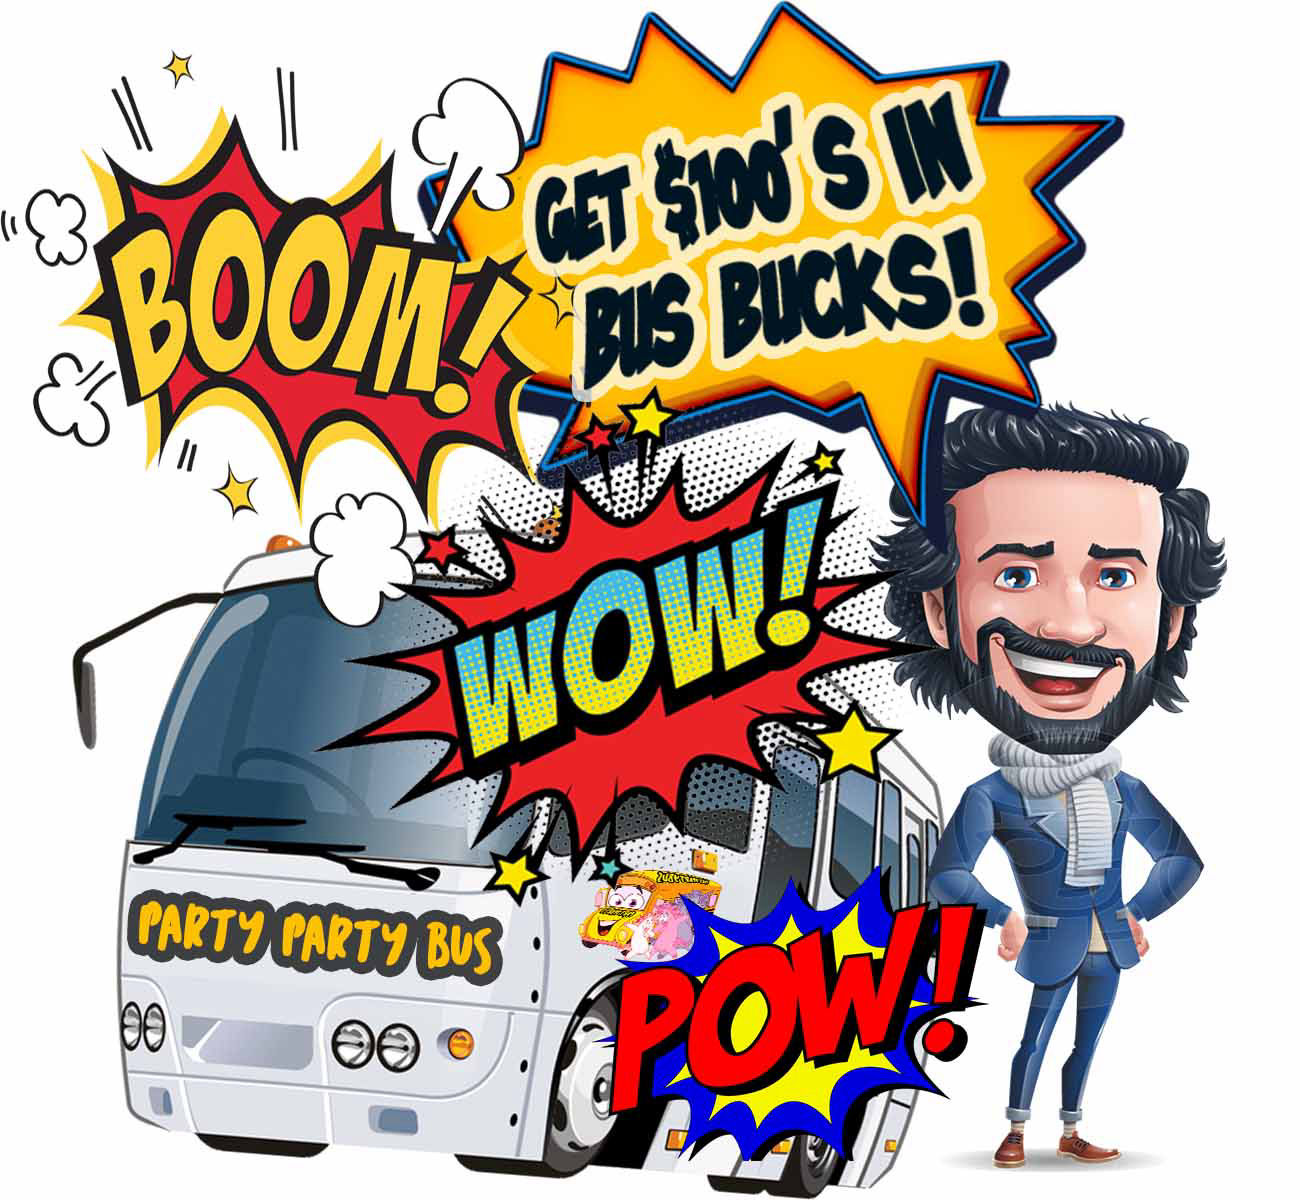 Book your PartyPartyBus for Brisbane, Gold Coast, Sunshine Coast, Toowoomba, Byron Bay, and all Queensland